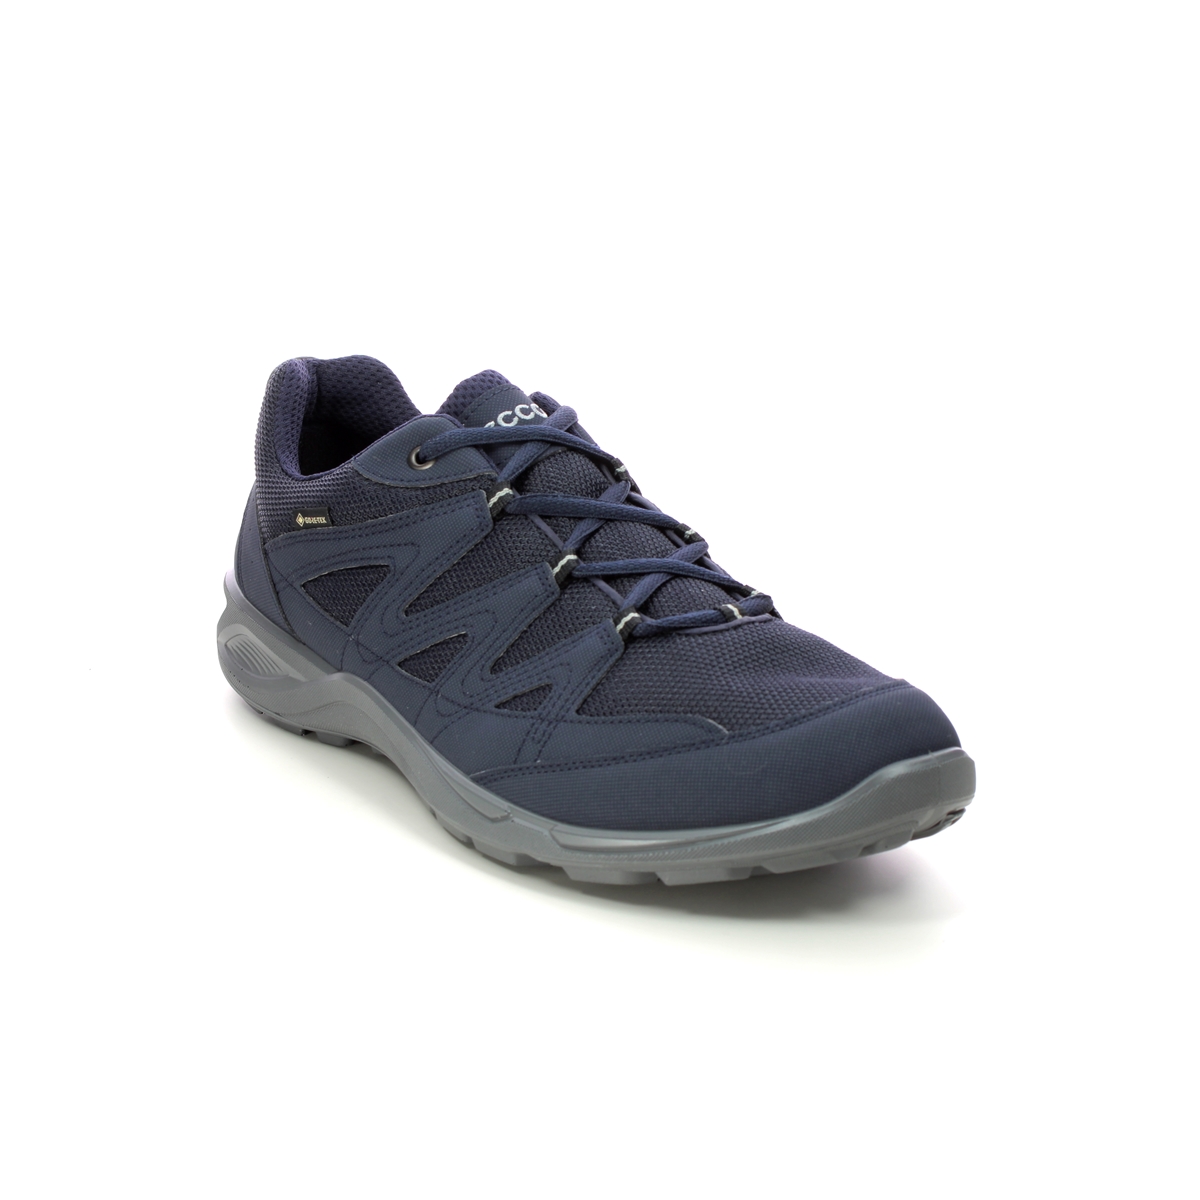 Ecco Terracruise Light Gtx Mens Navy Mens Trainers 825784-50769 In Size 41 In Plain Navy